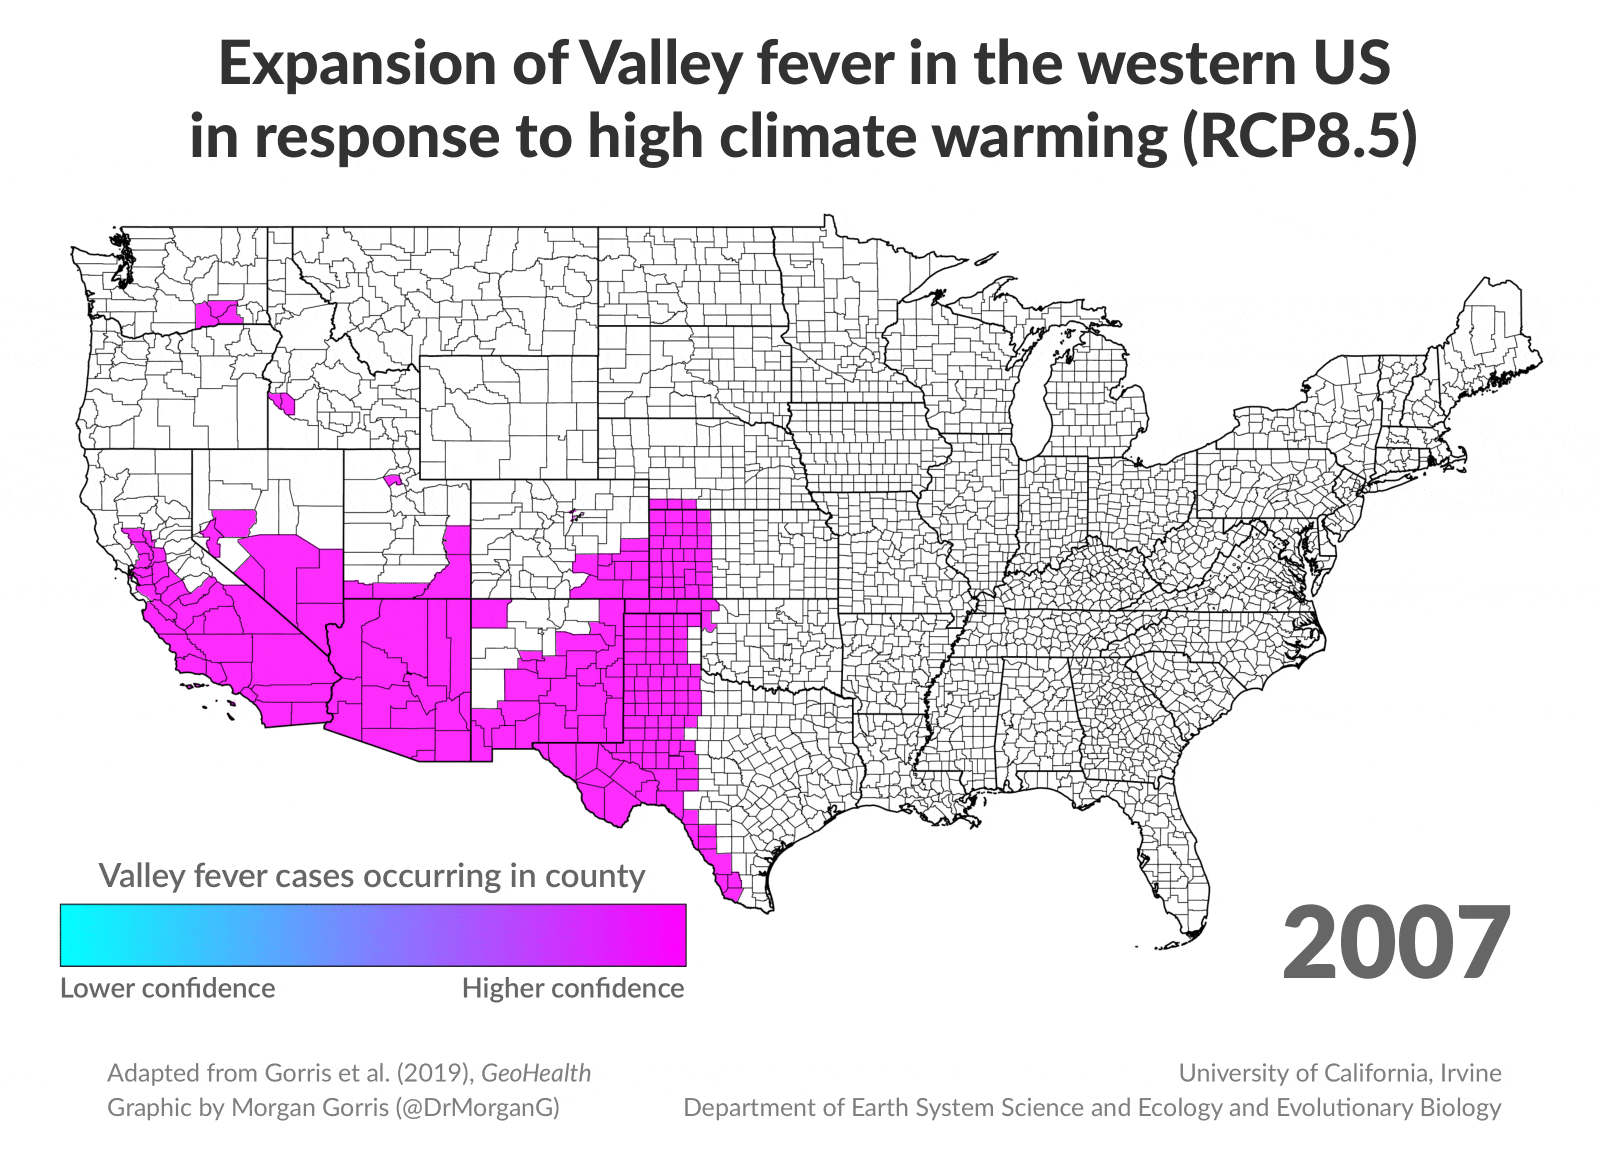 The gif shows Valley fever spreading from the southwest up through the midwest by 2095